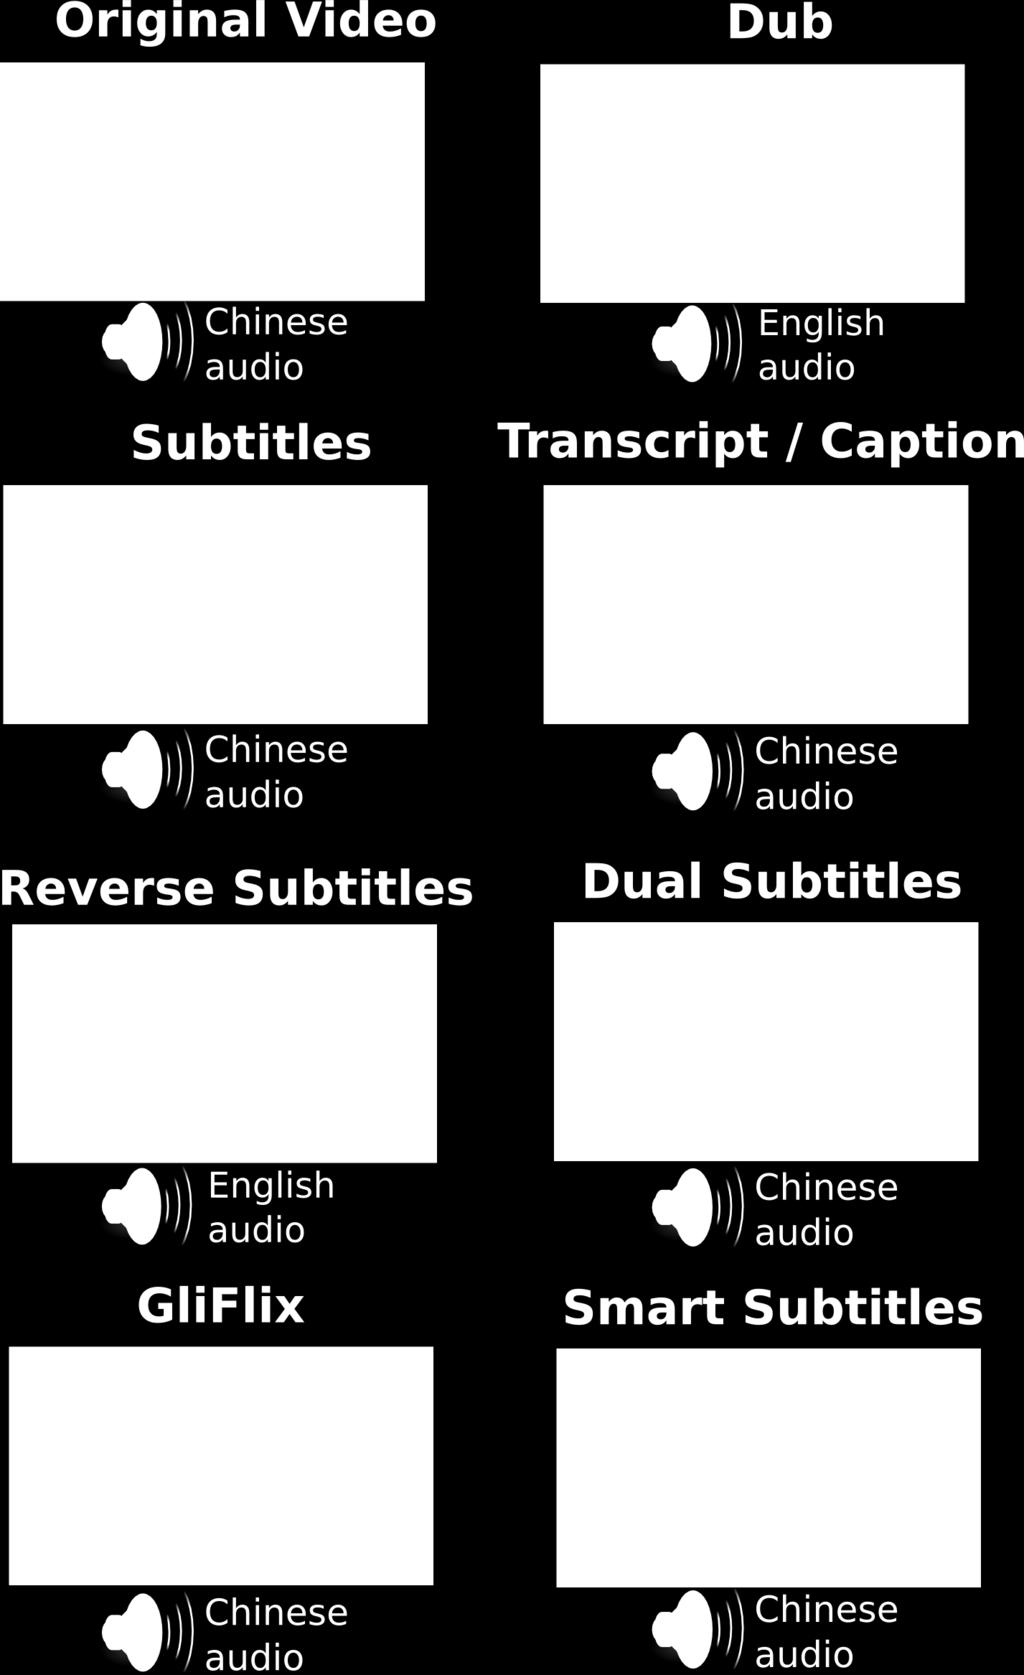 The Smart Subtitles system currently supports videos in Chinese, Japanese, French, German, and Spanish, and can be extended to other languages for which bilingual dictionaries are available.